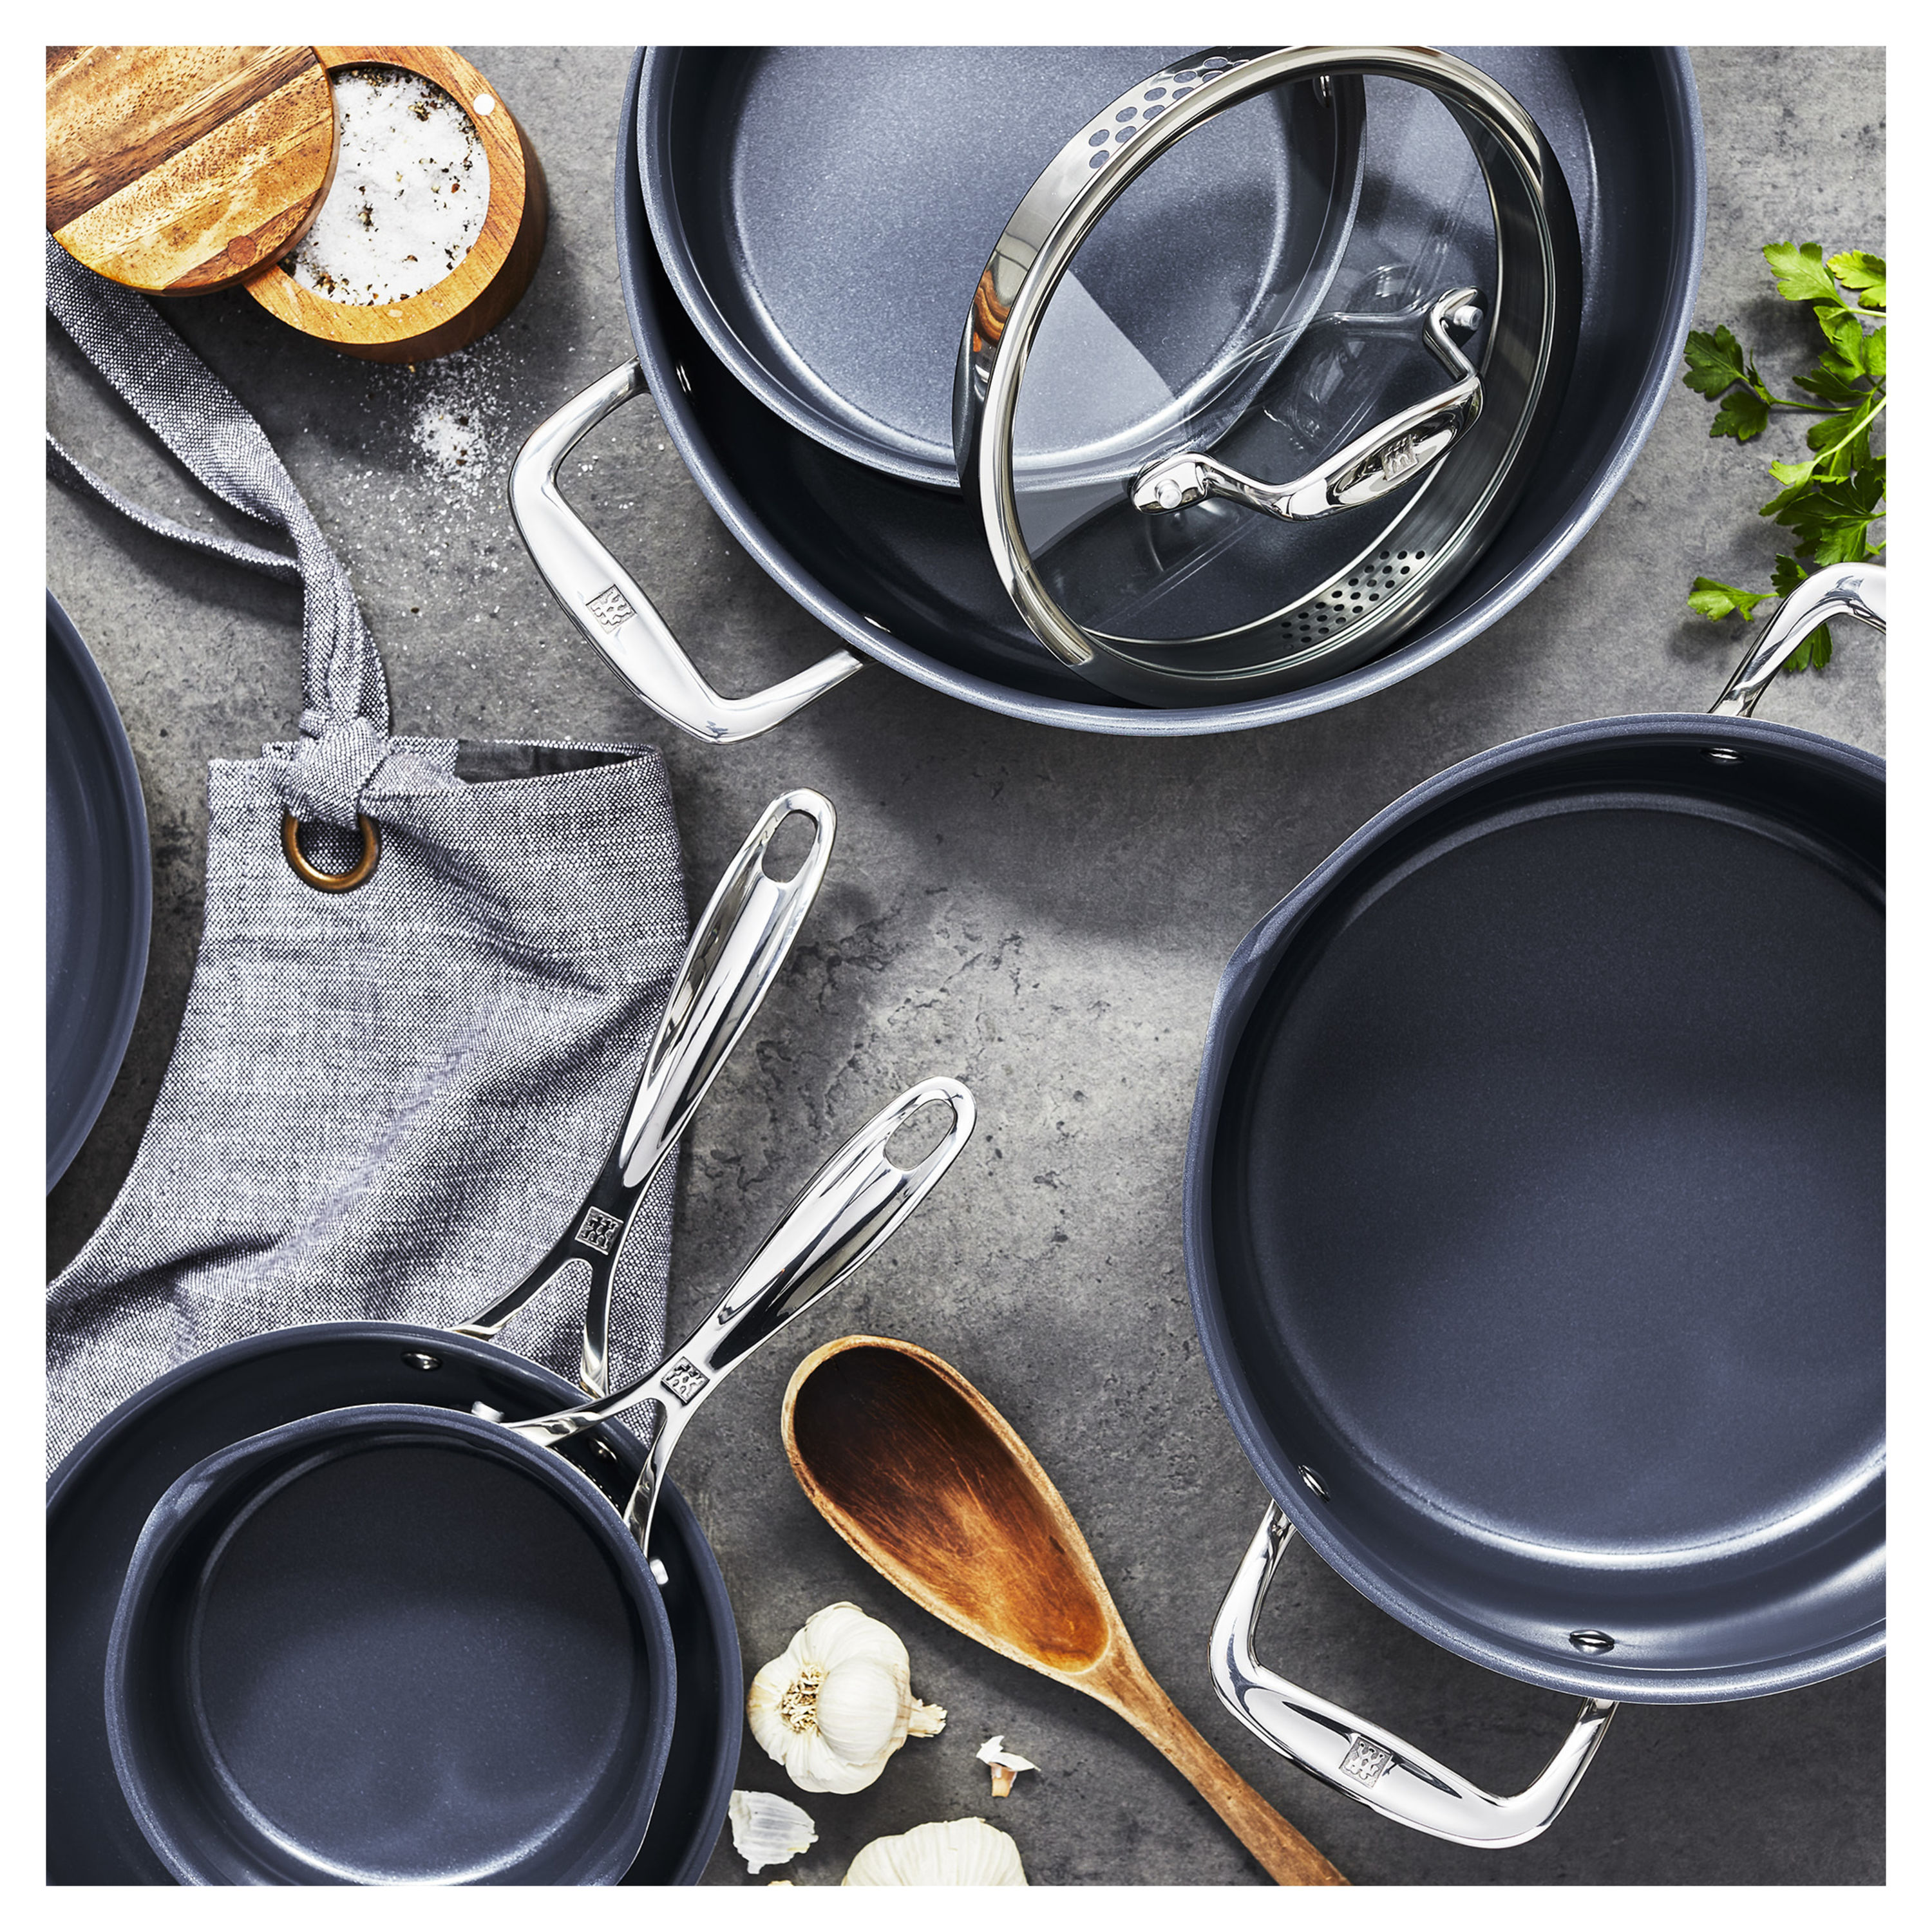 Buy ZWILLING Clad CFX Pots and pans set